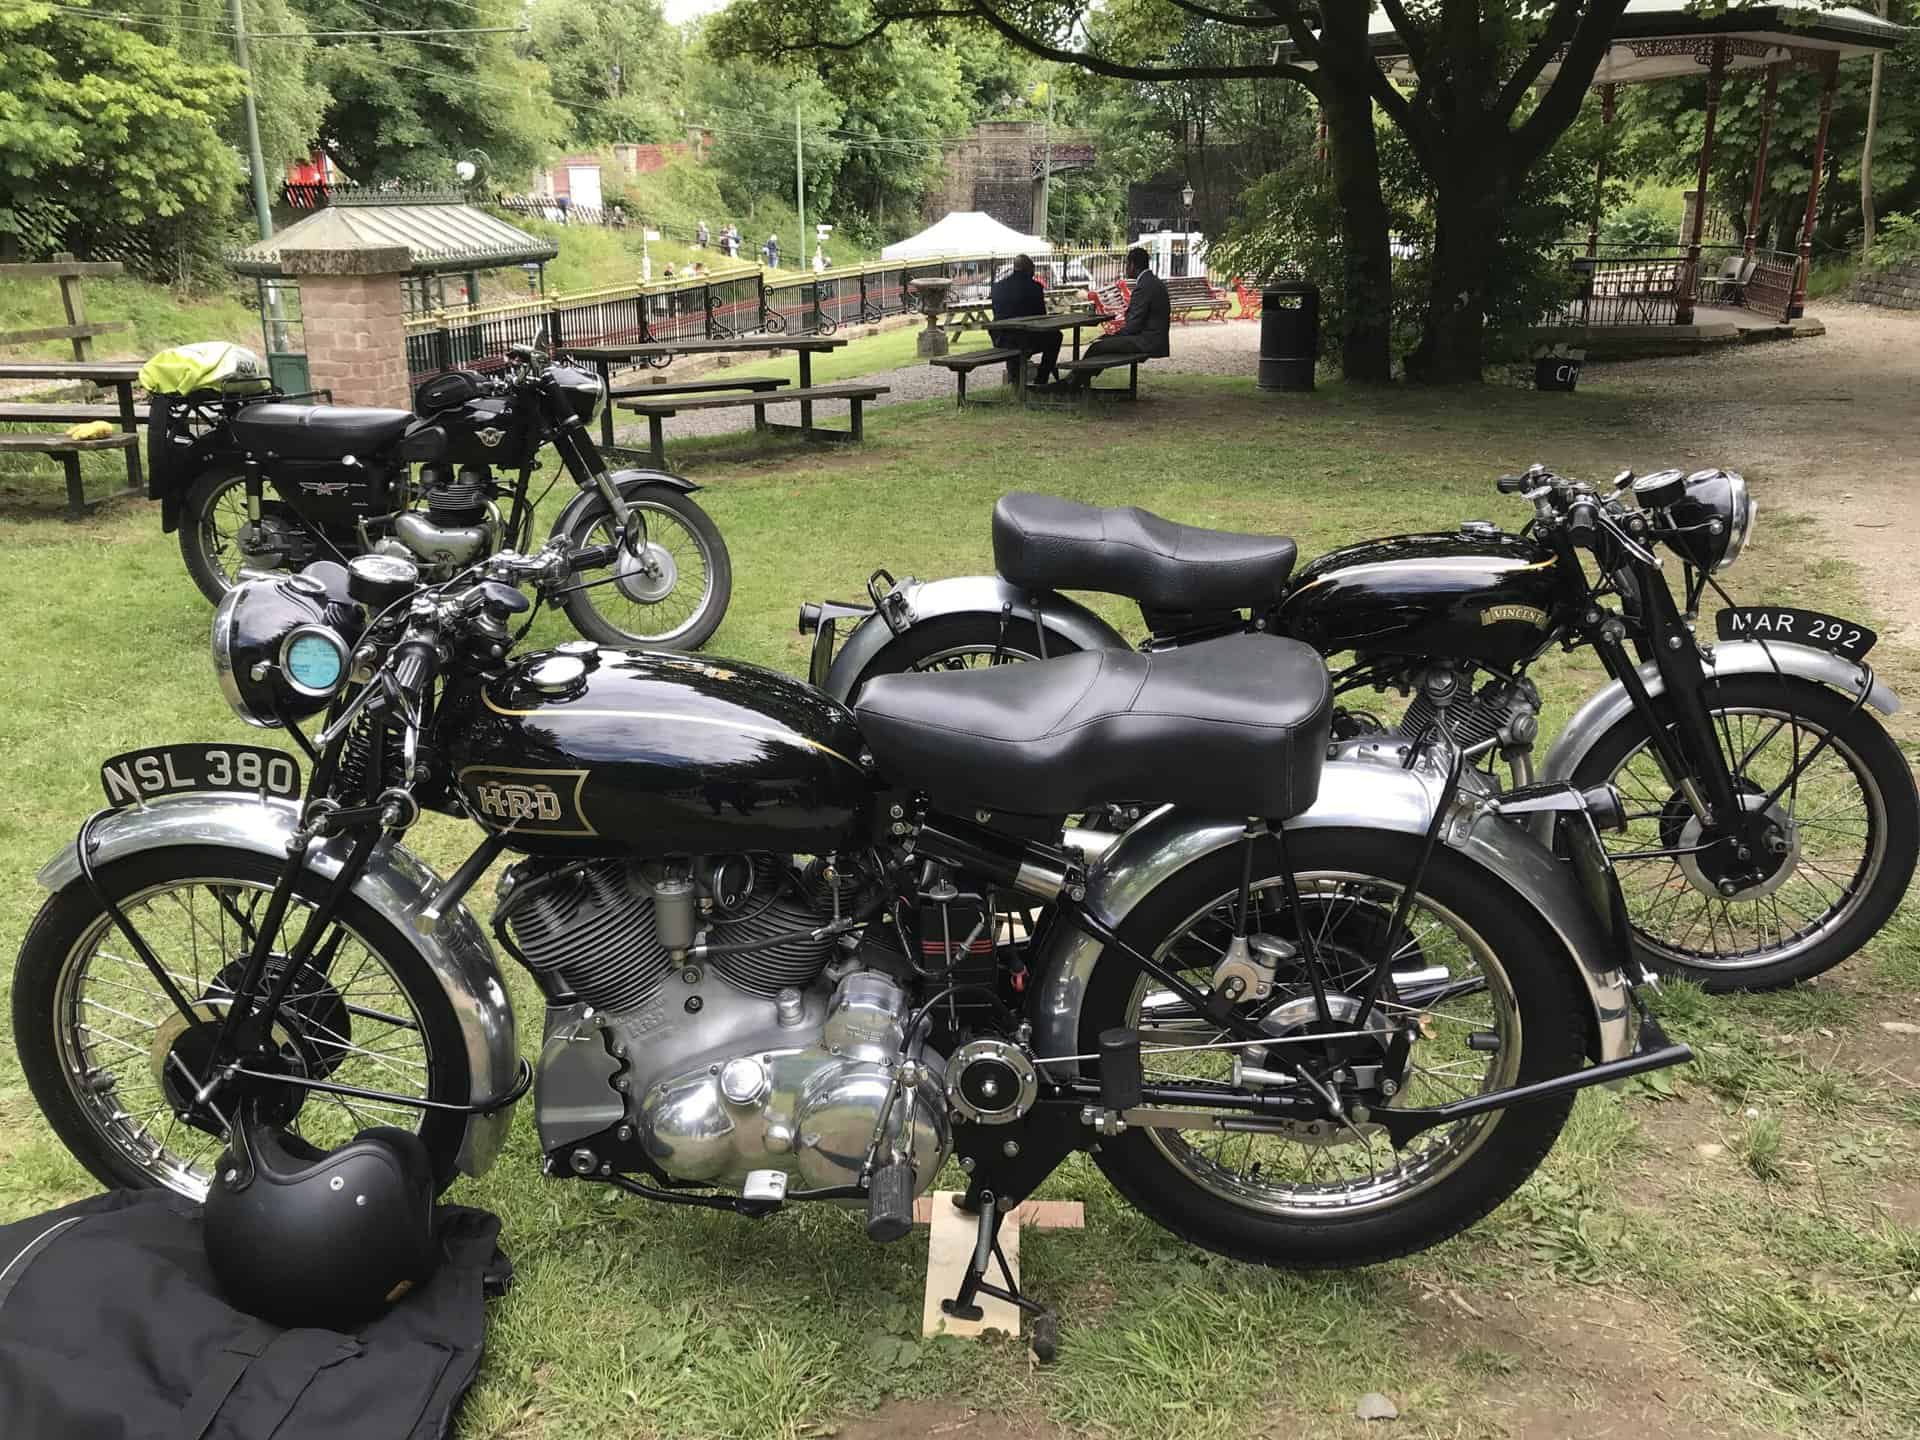 classic motorcycle day at crich tramway village 2022